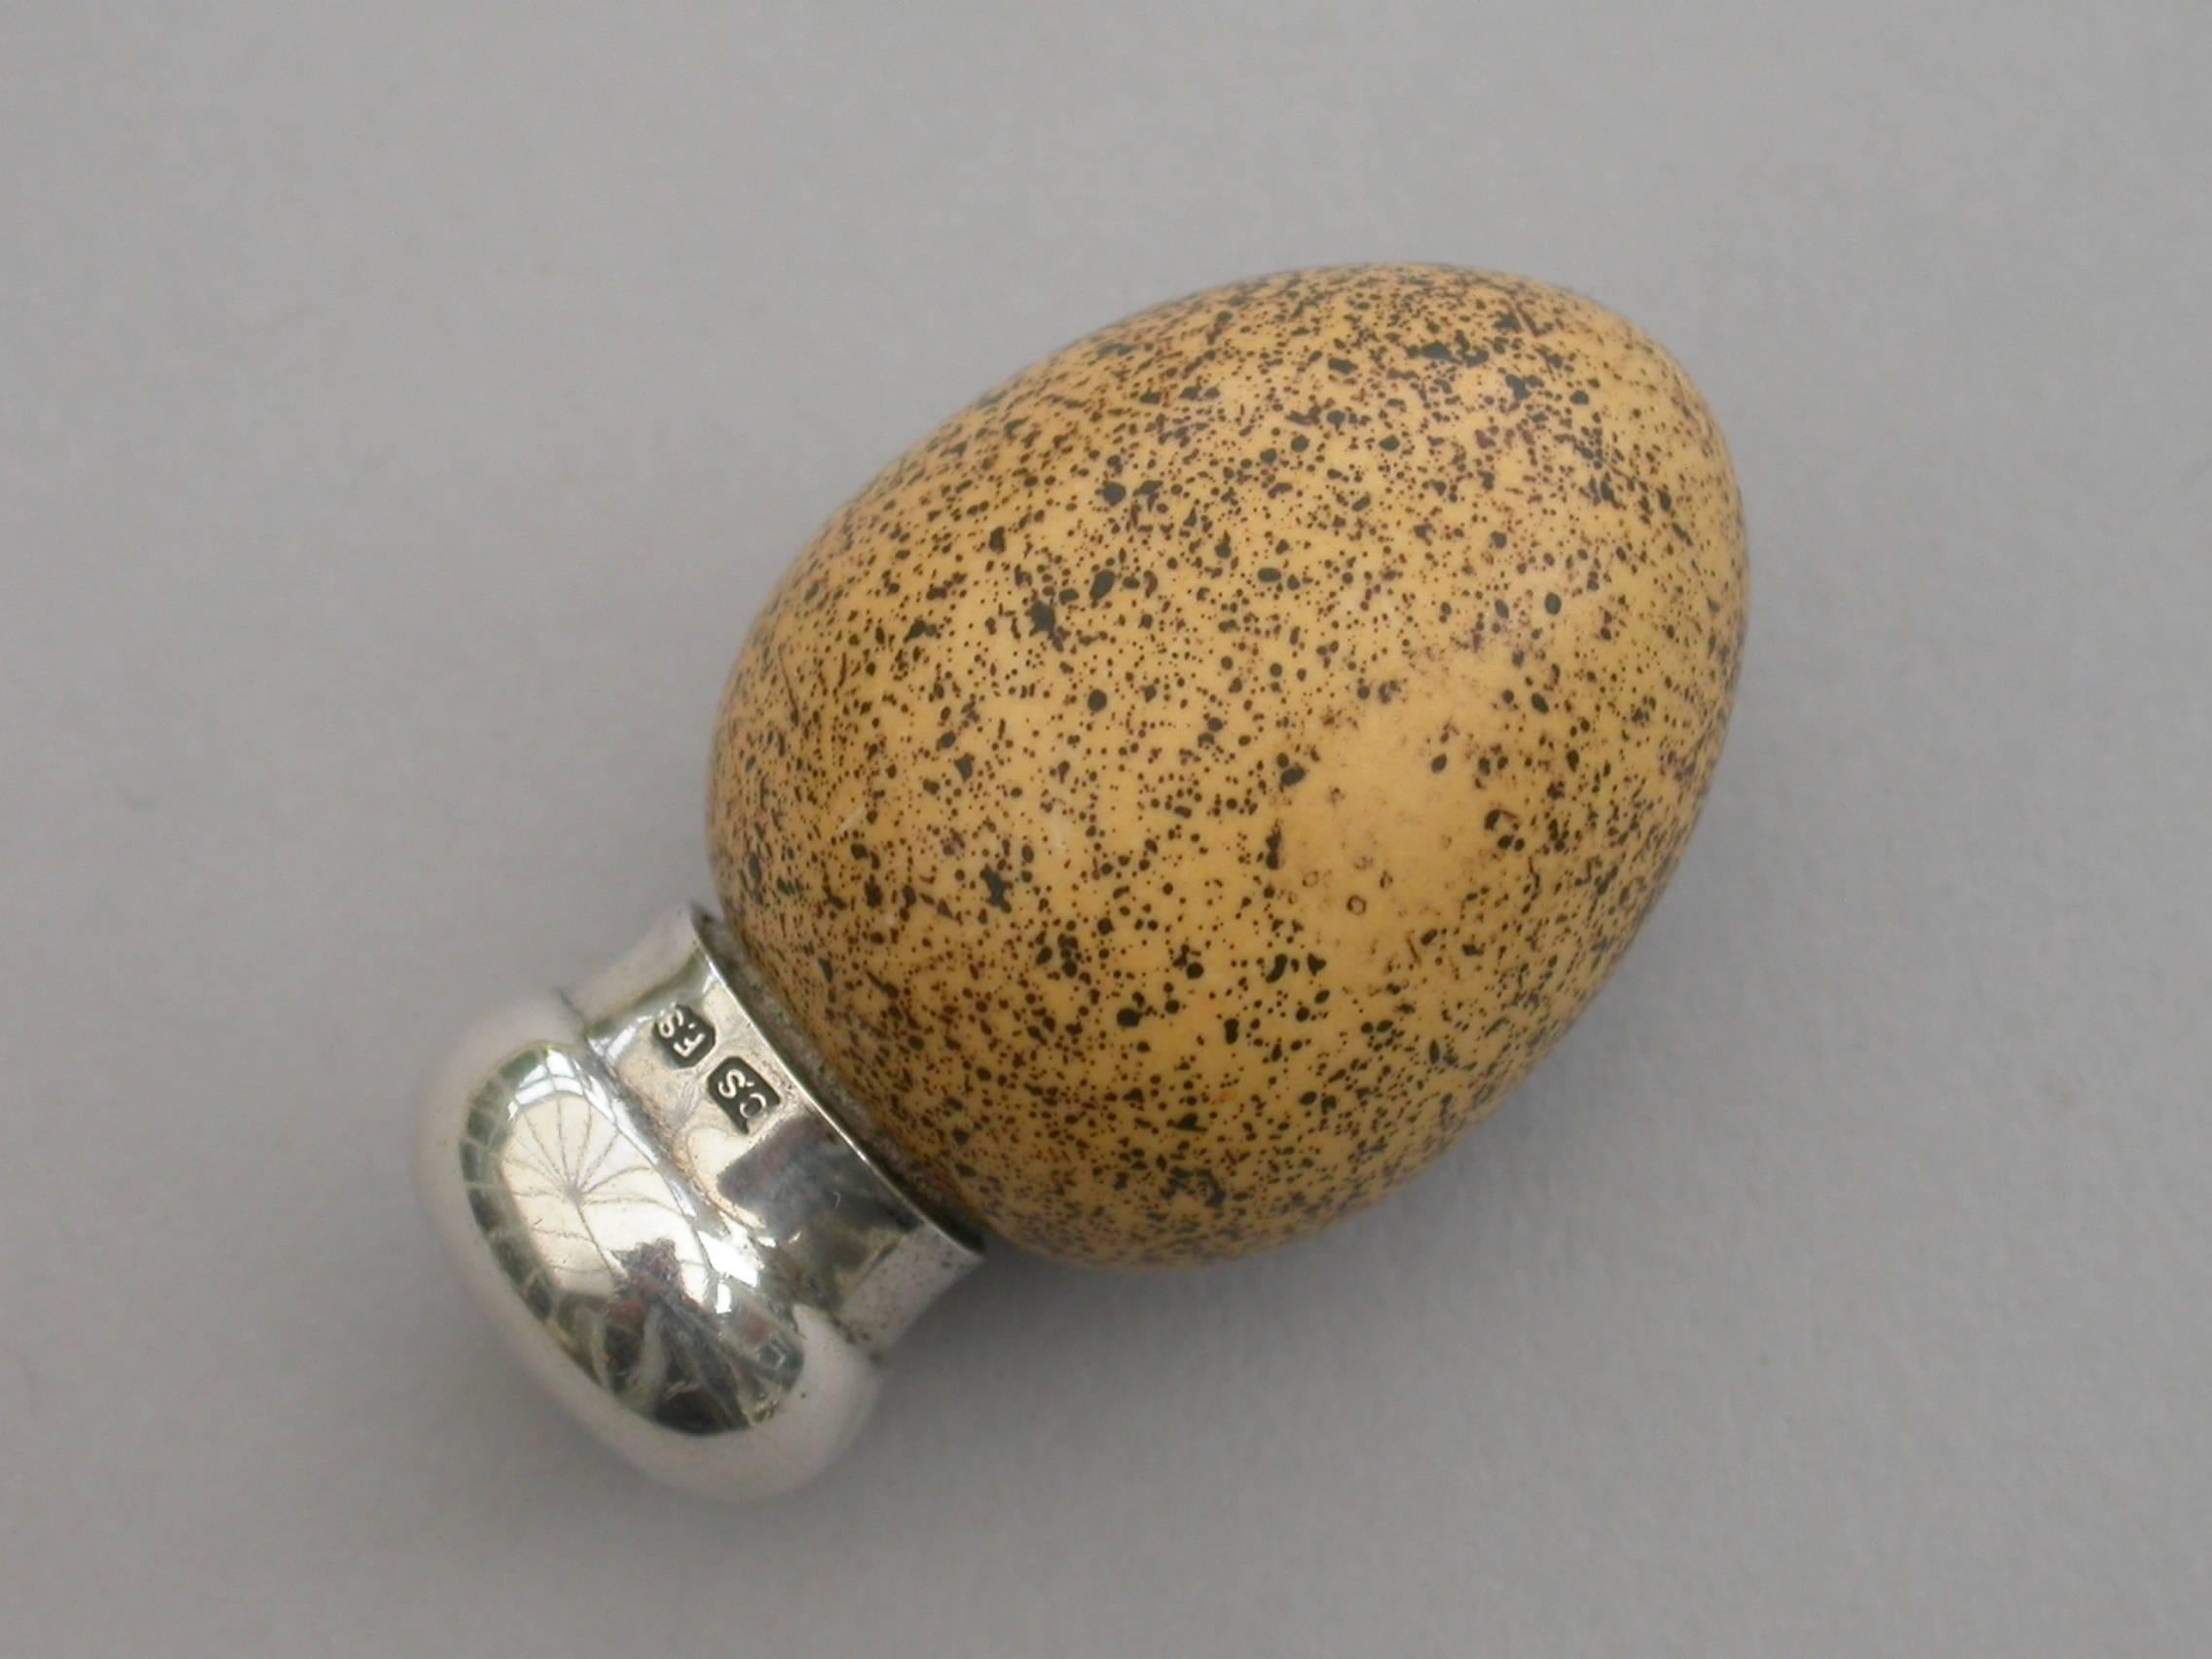 A good Victorian novelty silver and McIntyre ceramic scent bottle made in the form of a Wrens Egg, with screw-off silver top and of small size. The egg stamped with a registered design number: 20772.

By Saunders & Shepherd, Birmingham, 1896

In